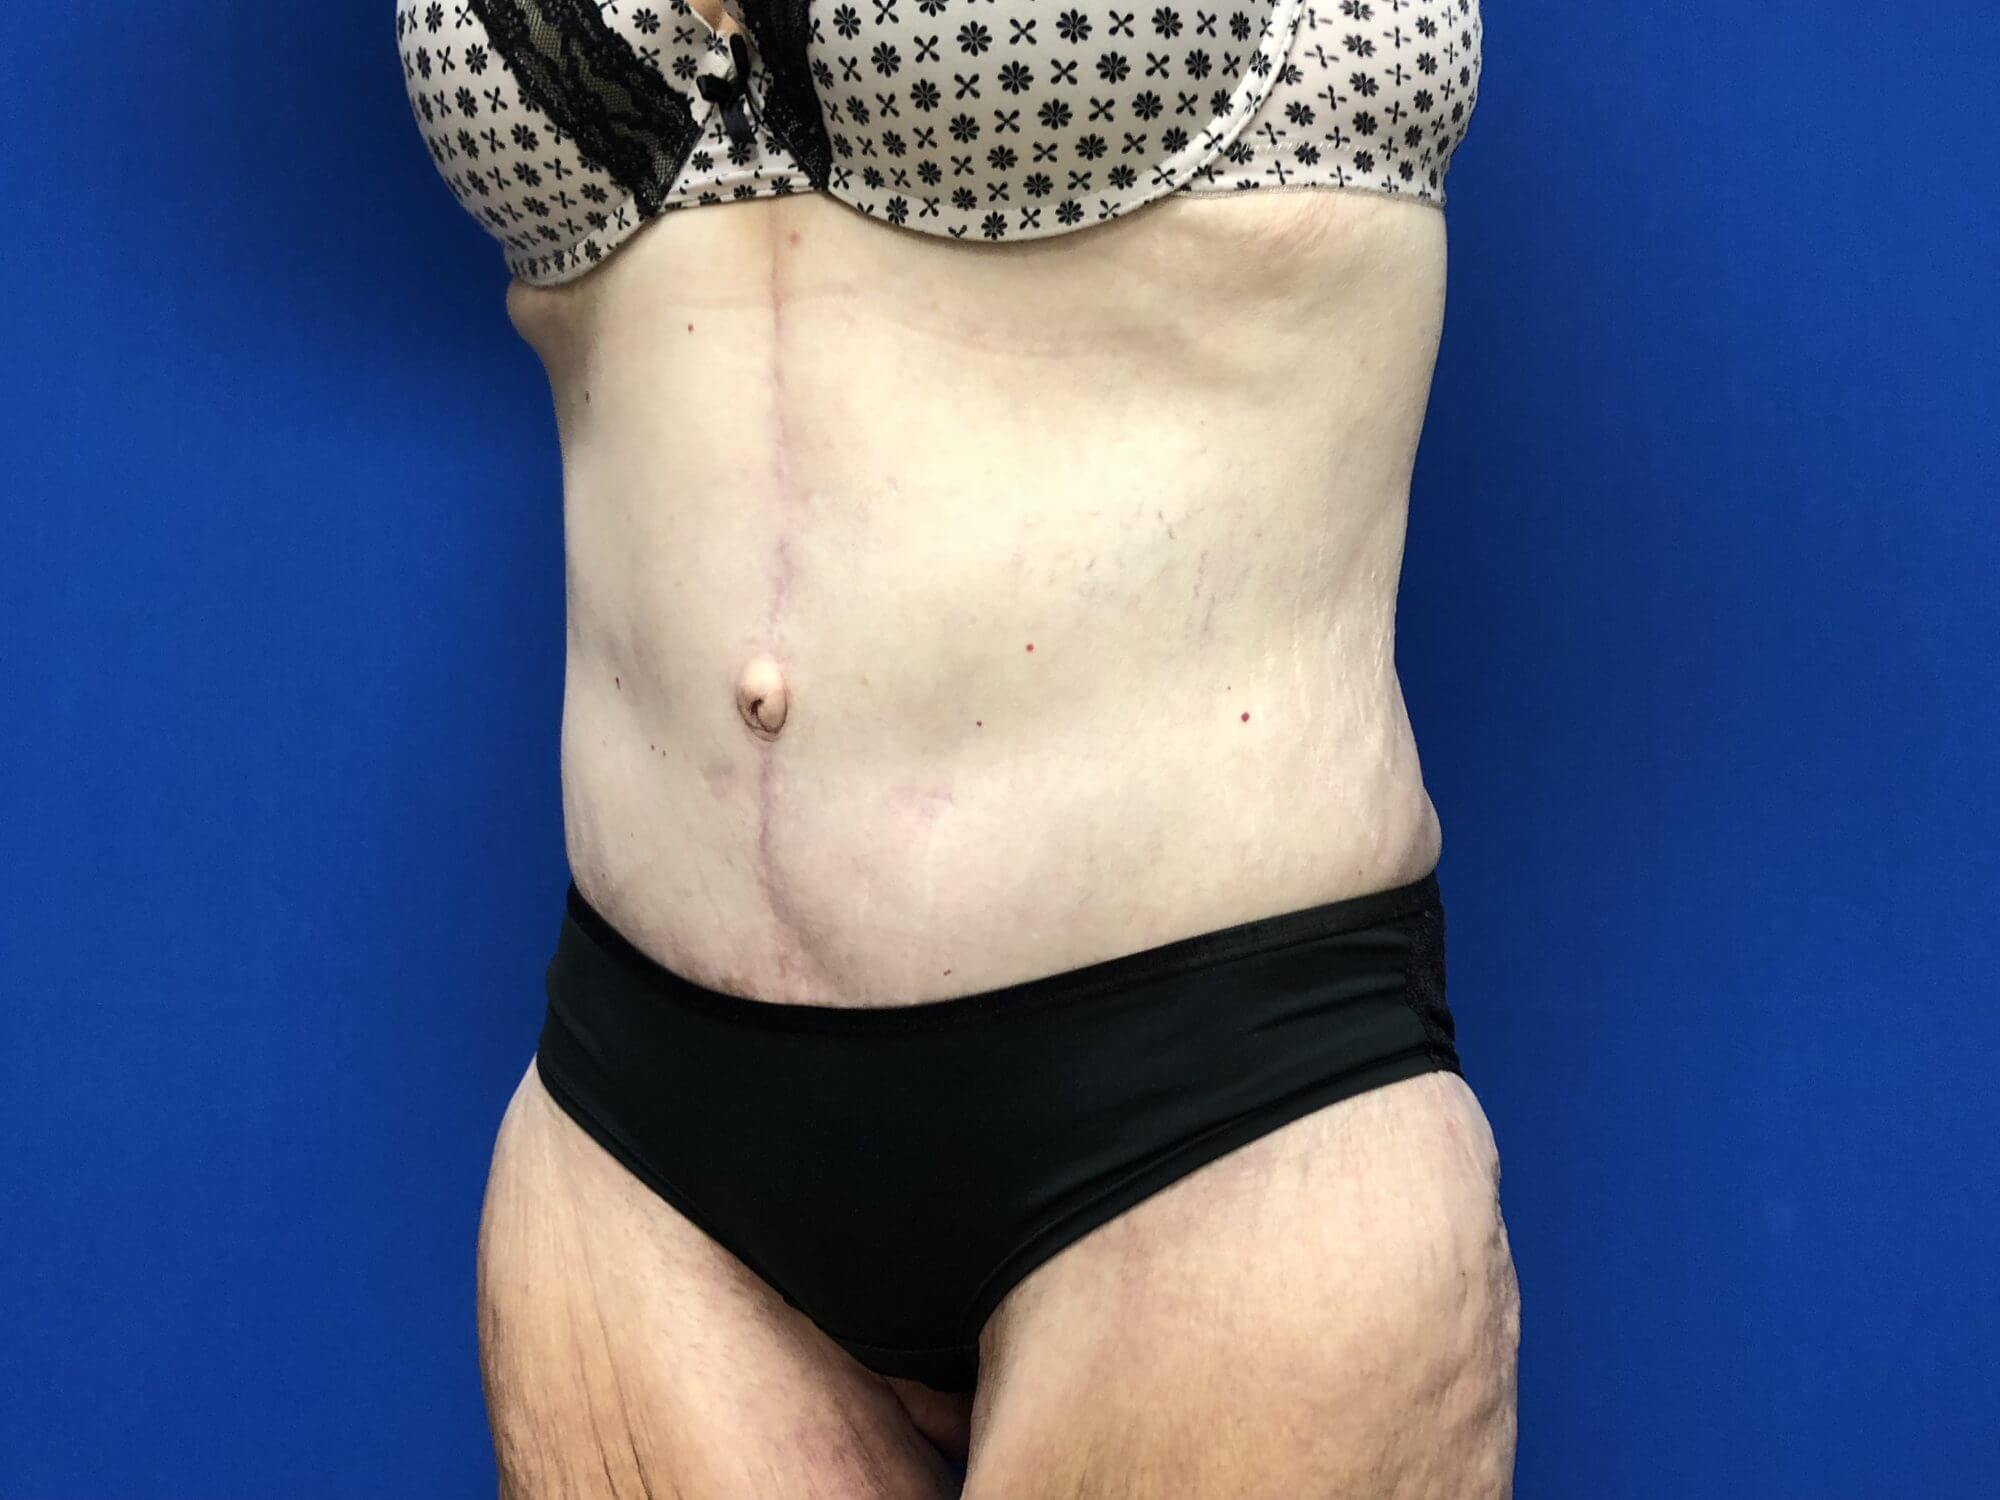 Tummy Tuck Before & After Gallery Tampa - Bose Plastic Surgery